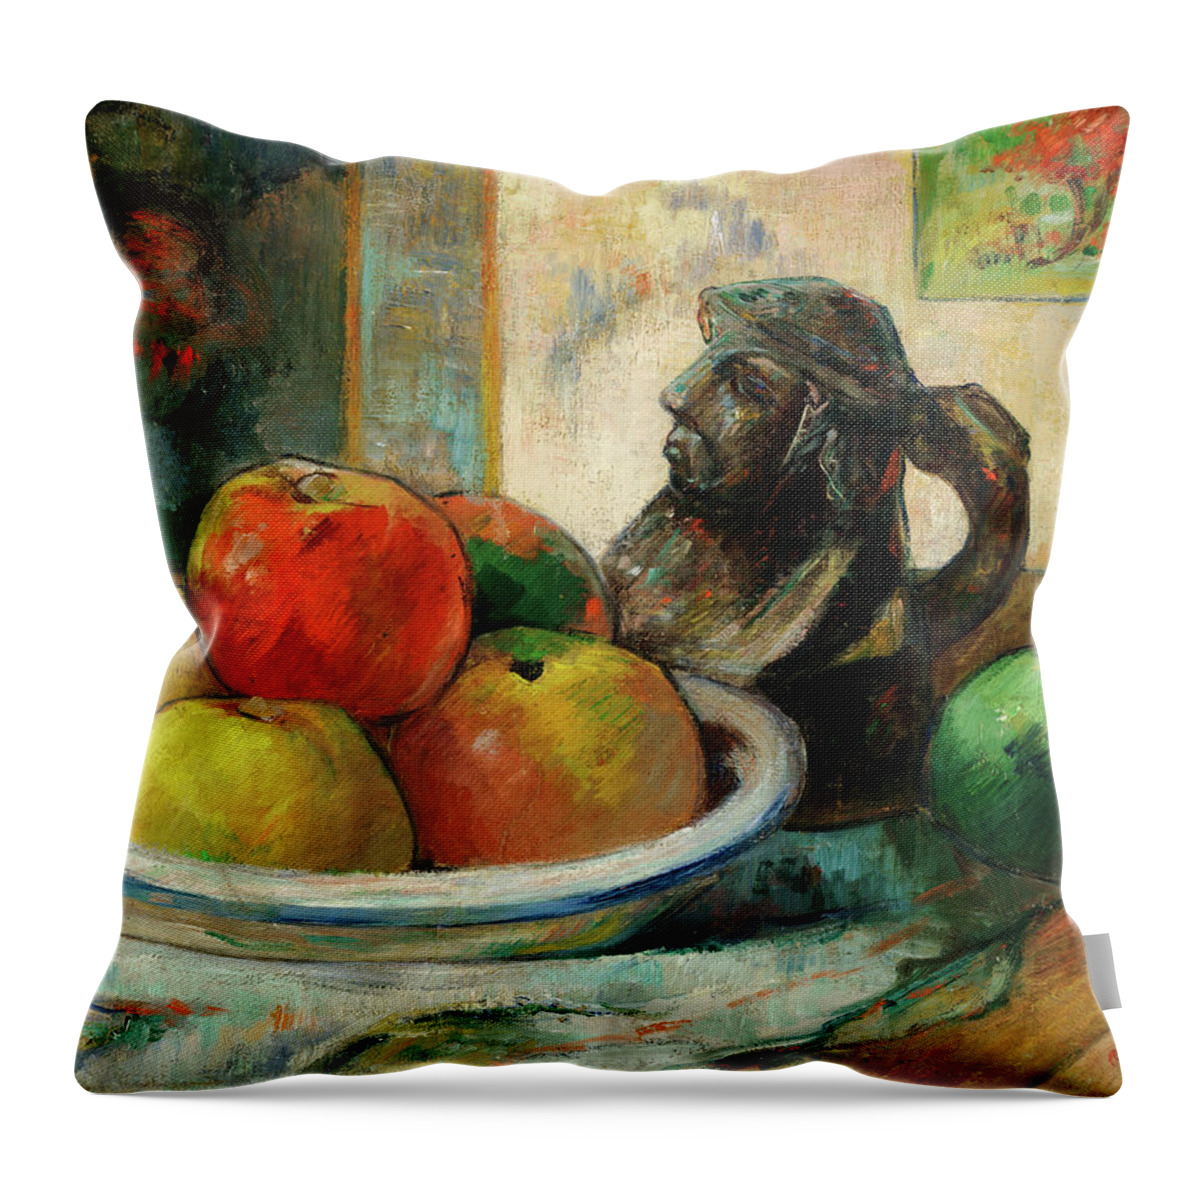 Paul Gauguin Throw Pillow featuring the painting Still Life with Apples, a Pear, and Ceramic Portrait Jug, 1889 by Paul Gauguin